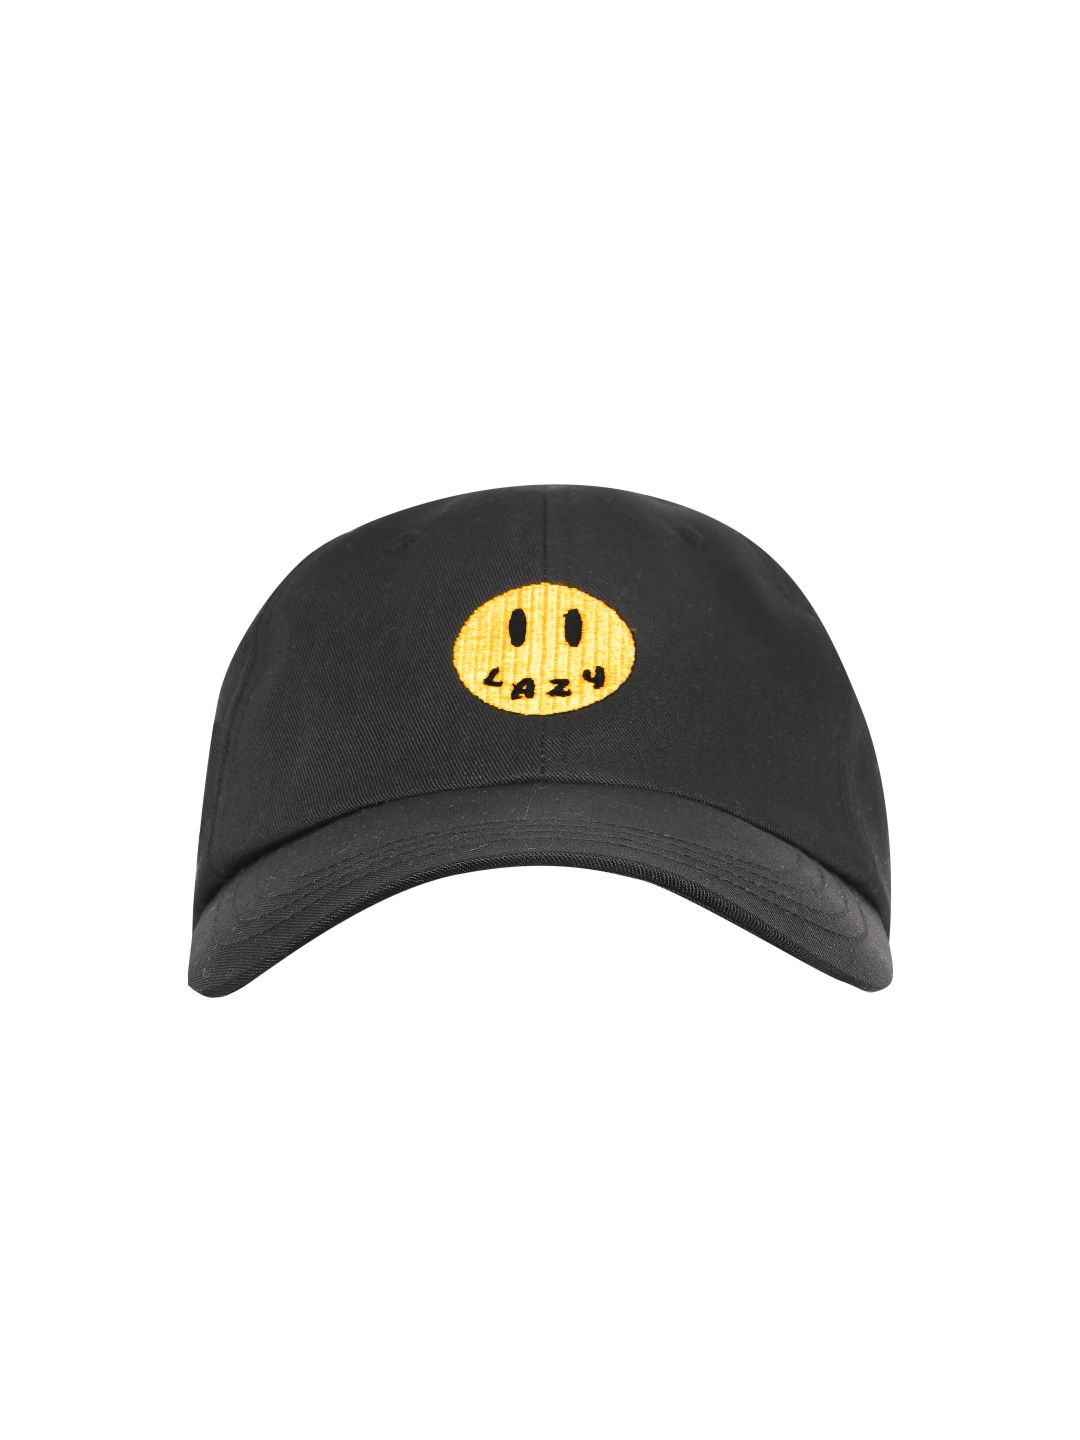 Blueberry Unisex Black & Yellow Embroidered Baseball Cap Price in India